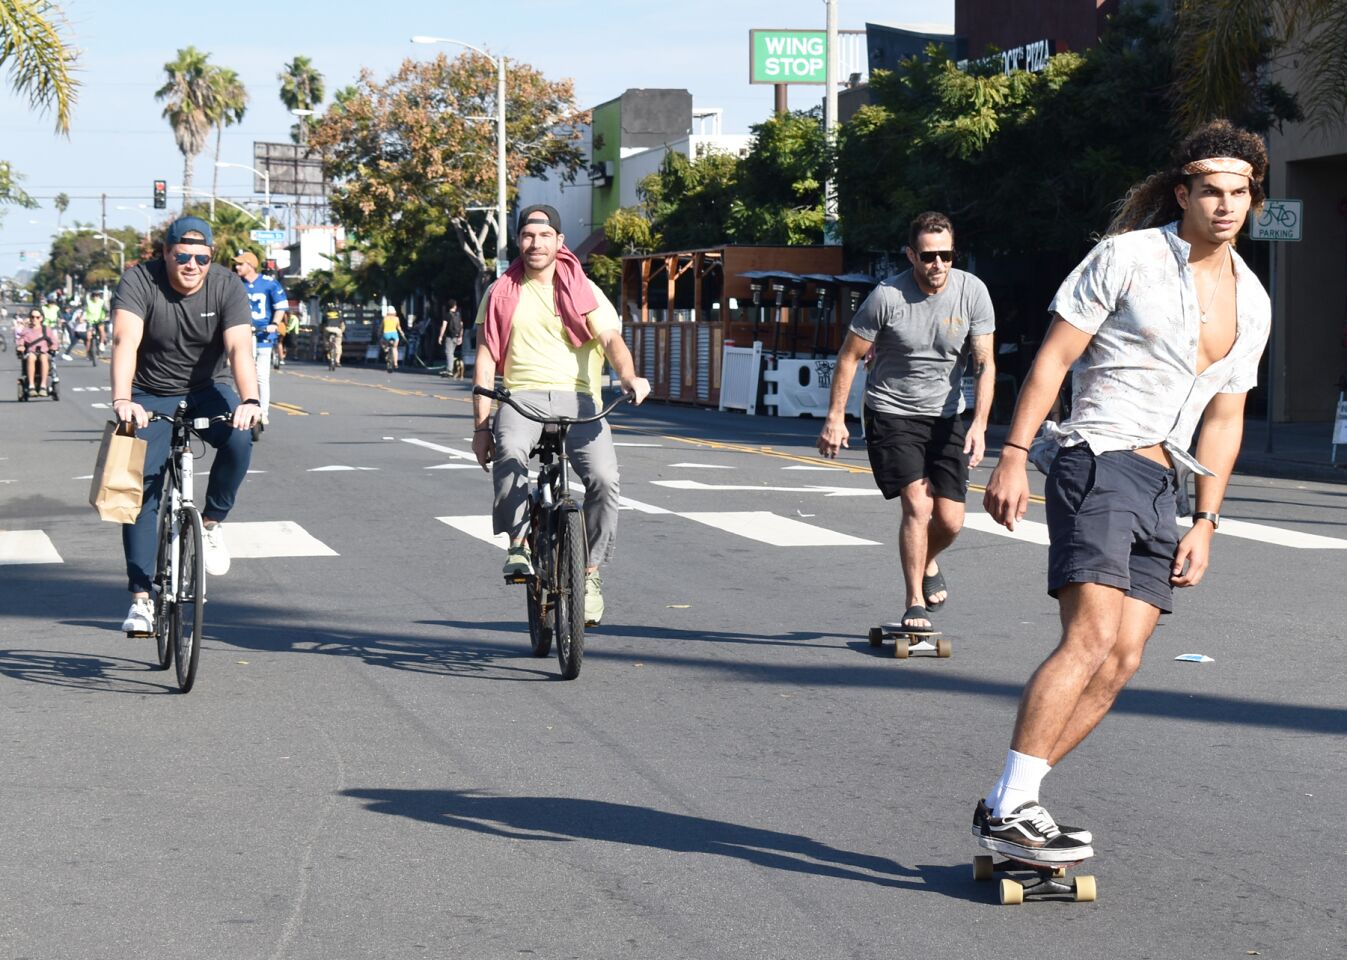 Skateboarders and bicyclists traveled down Garnet Avenue together during CicloSDias in Pacific Beach.